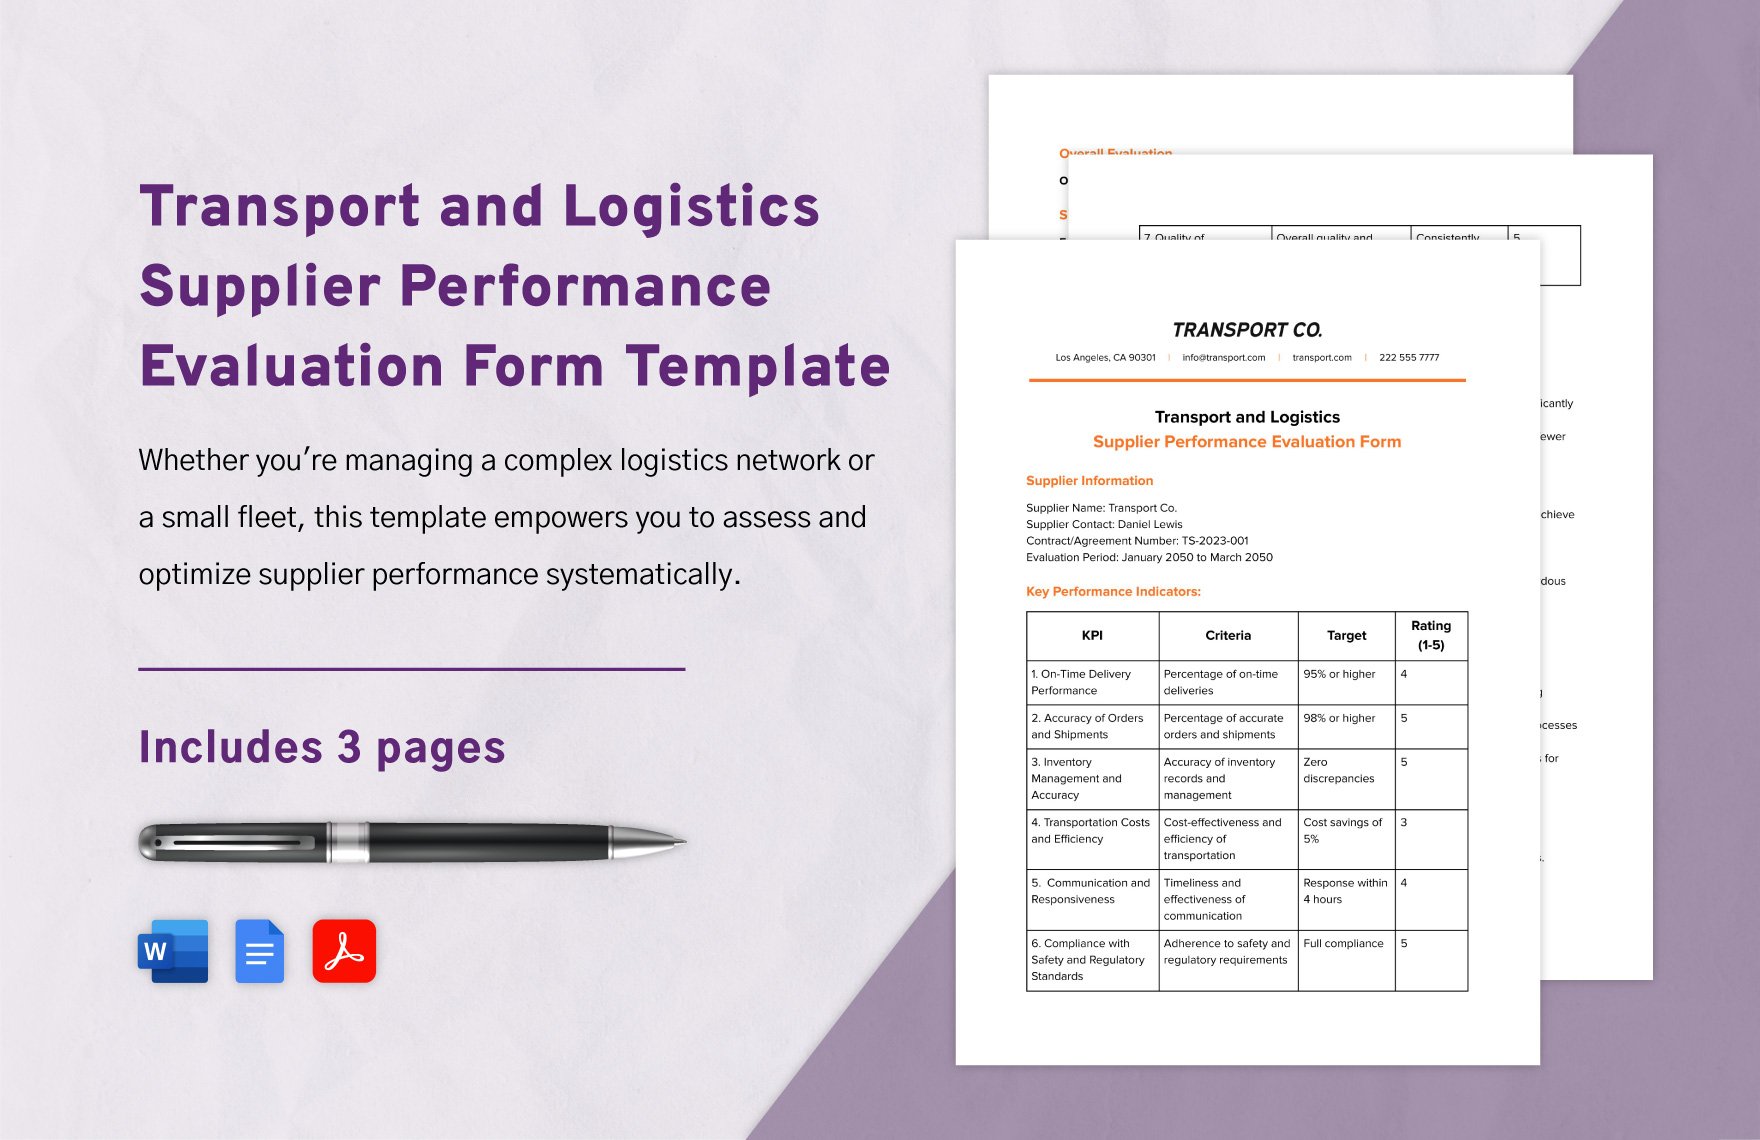 Transport and Logistics Supplier Performance Evaluation Form Template